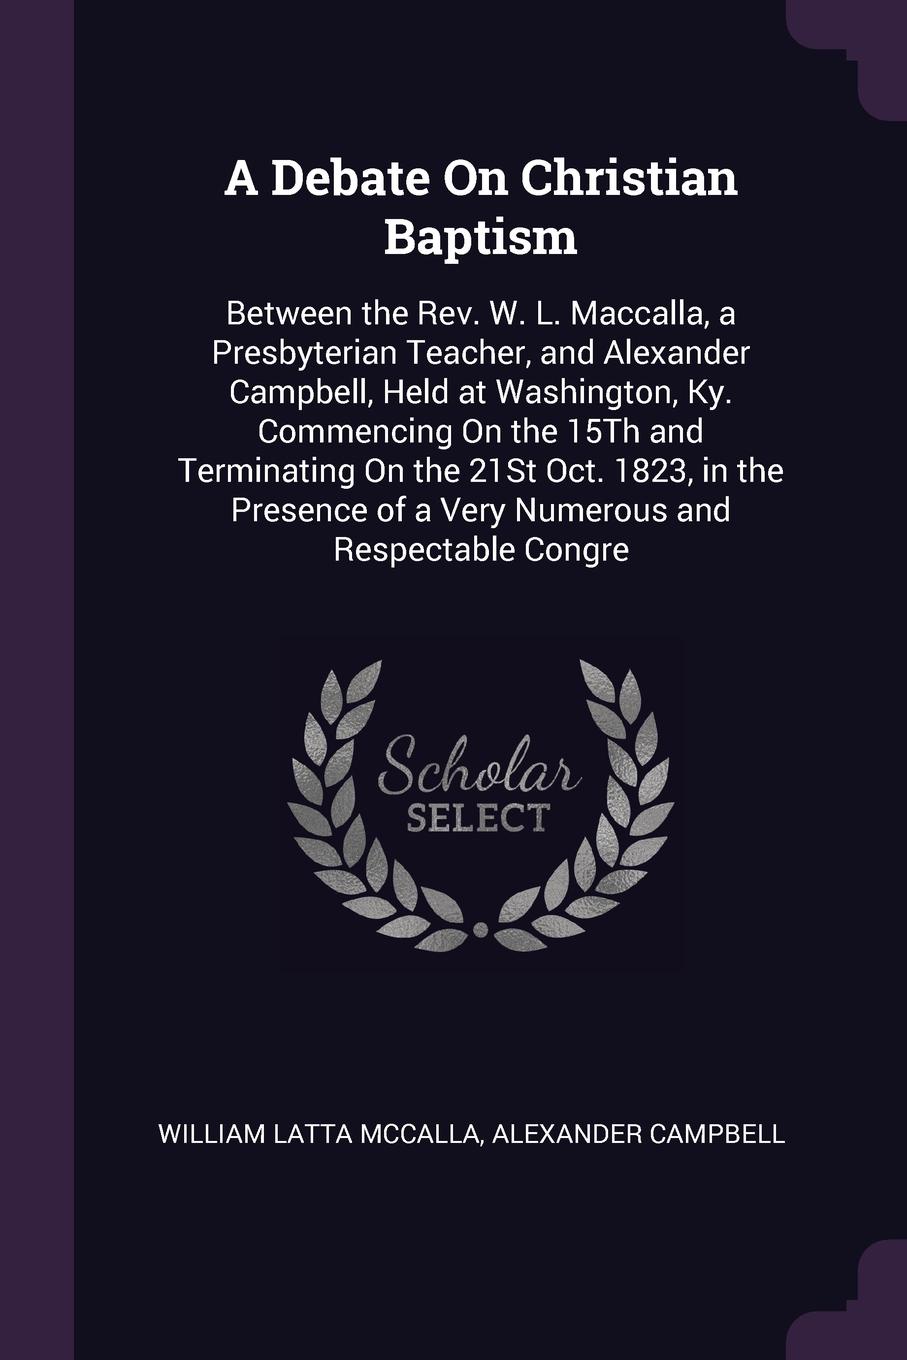 A Debate On Christian Baptism. Between the Rev. W. L. Maccalla, a Presbyterian Teacher, and Alexander Campbell, Held at Washington, Ky. Commencing On the 15Th and Terminating On the 21St Oct. 1823, in the Presence of a Very Numerous and Respectabl...